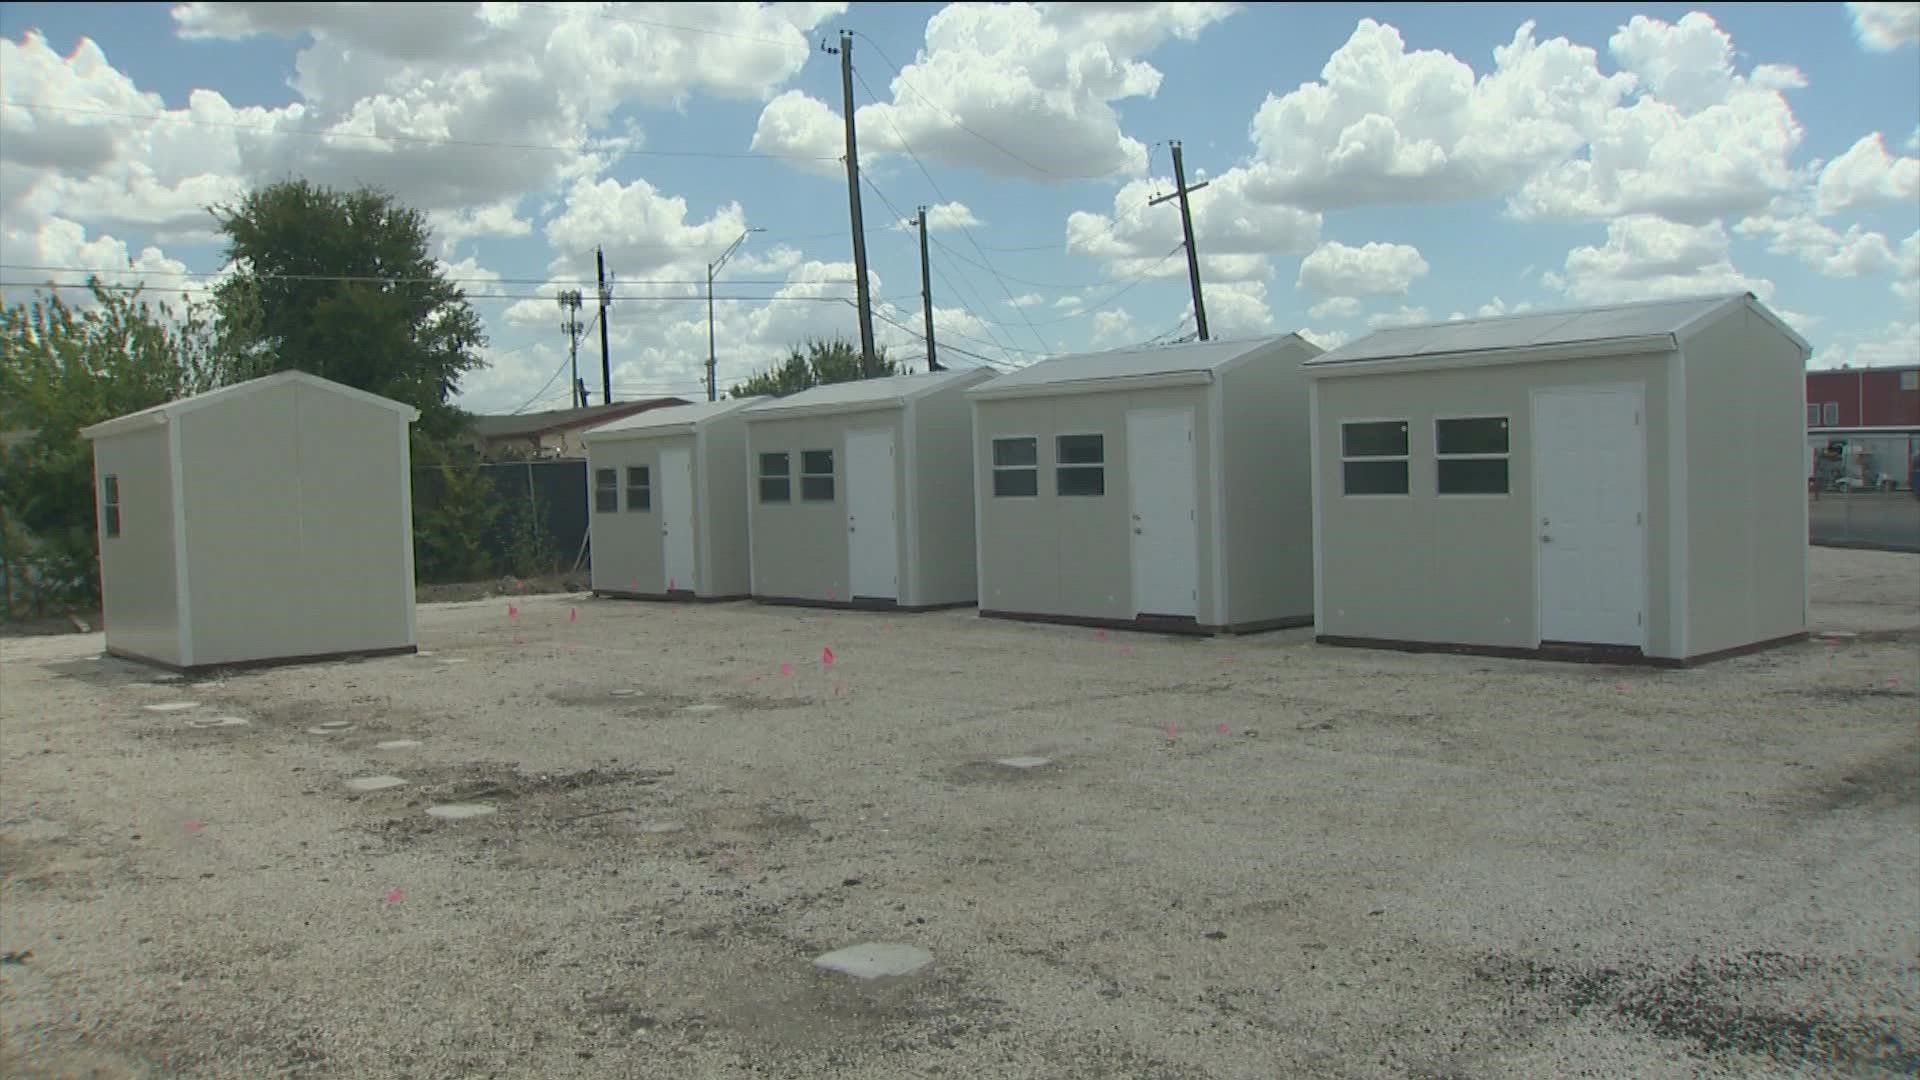 The shelters come with electricity and A/C, plus community centers.